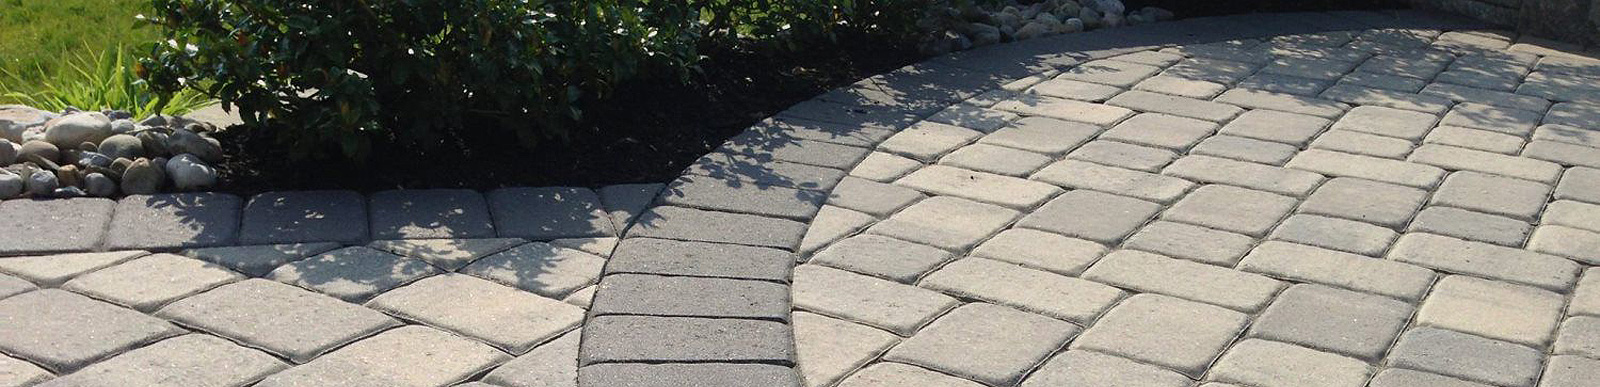 Brick by Brick Pavers and Landscaping